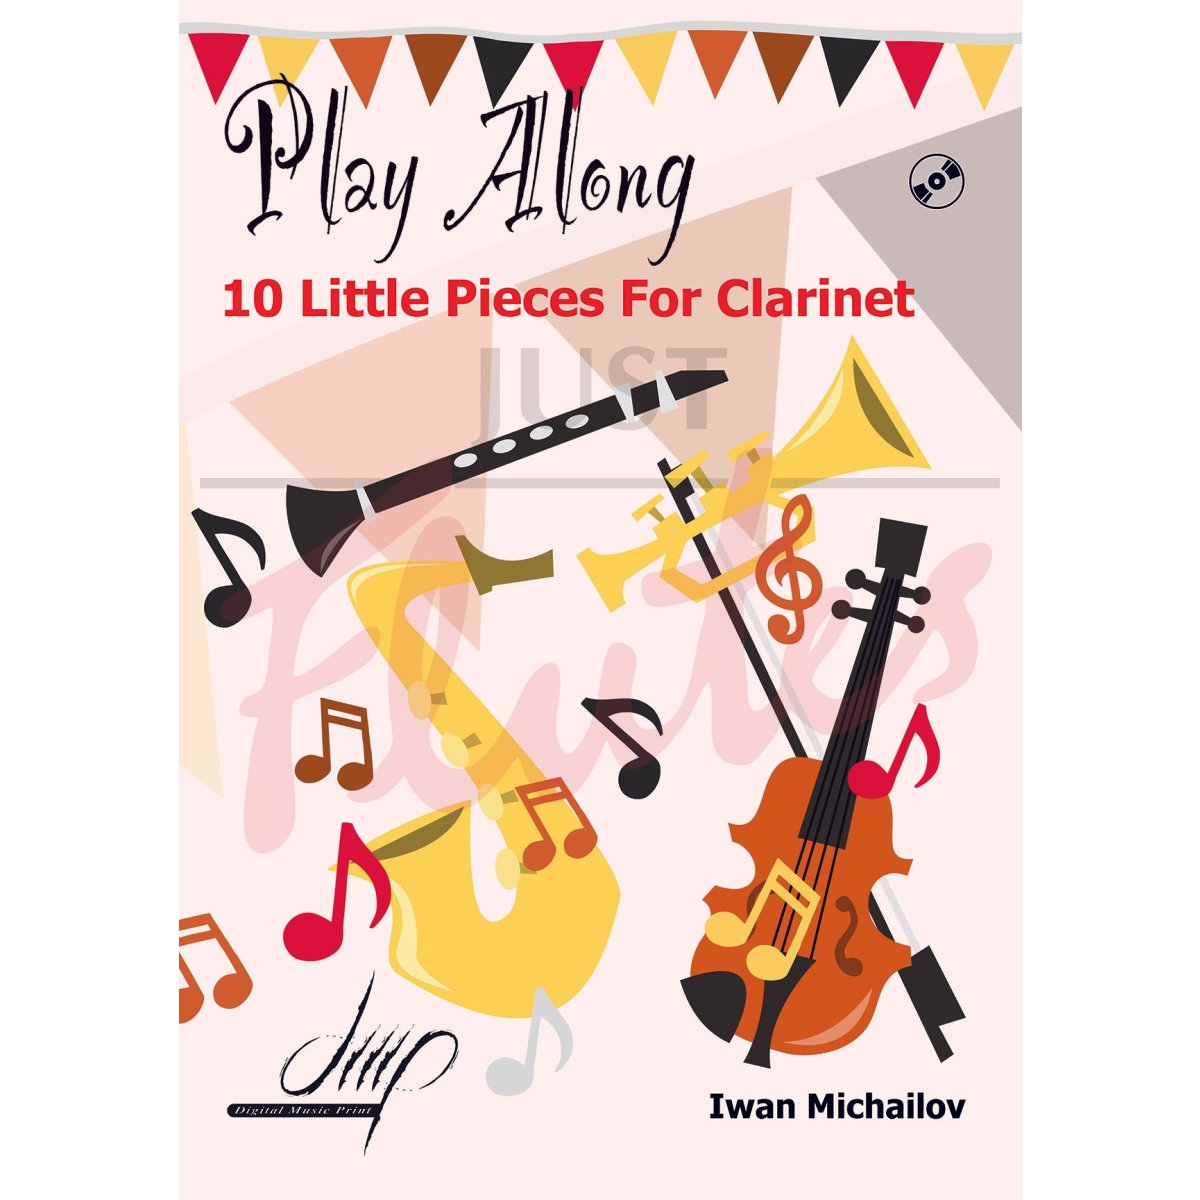 10 Little Pieces for Clarinet